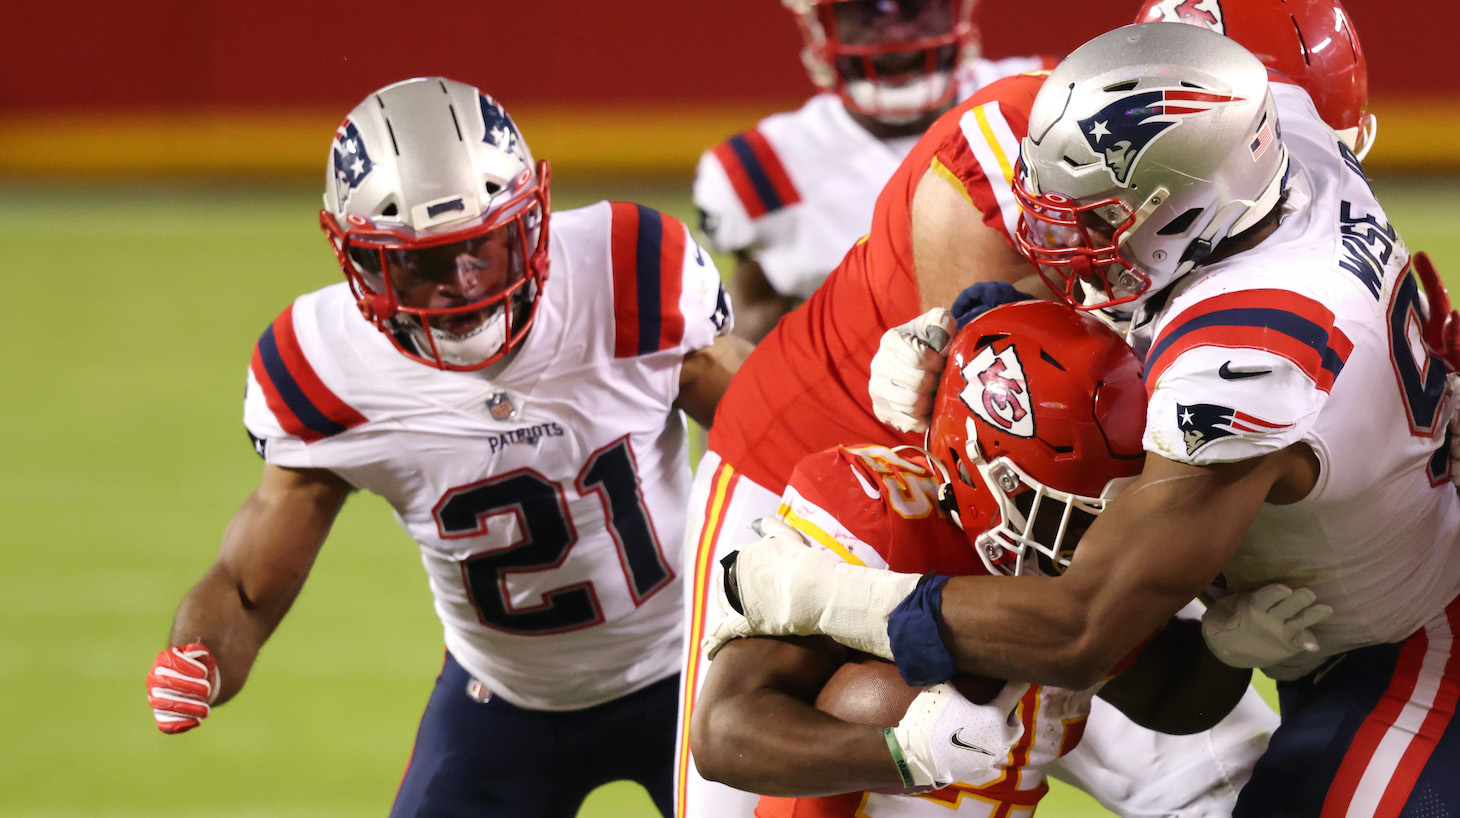 KANSAS CITY, MISSOURI - OCTOBER 05: Deatrich Wise #91 of the New England Patriots tackles Clyde Edwards-Helaire #25 of the Kansas City Chiefs during the second half at Arrowhead Stadium on October 05, 2020 in Kansas City, Missouri. (Photo by Jamie Squire/Getty Images)